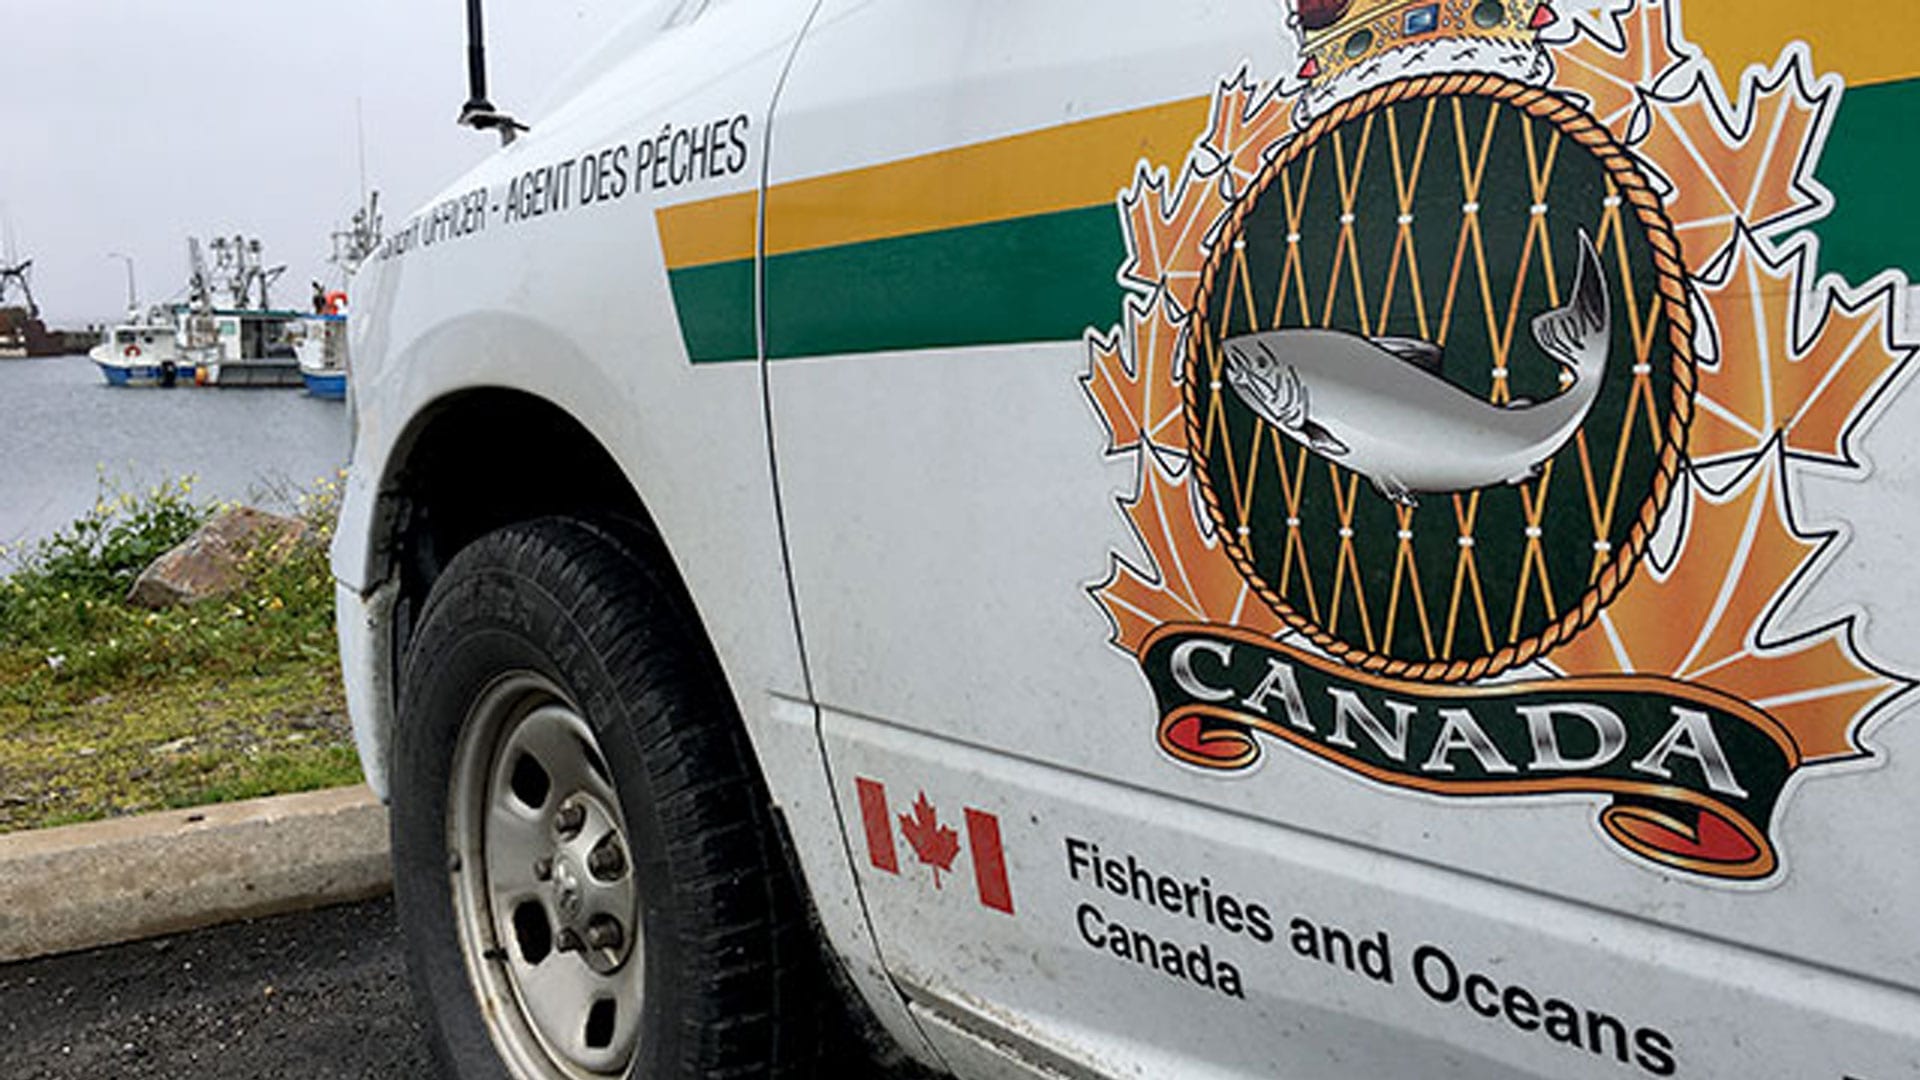 DFO has a 'take it or leave it' approach to fishing rights that needs to  change say Mi'kmaw leaders